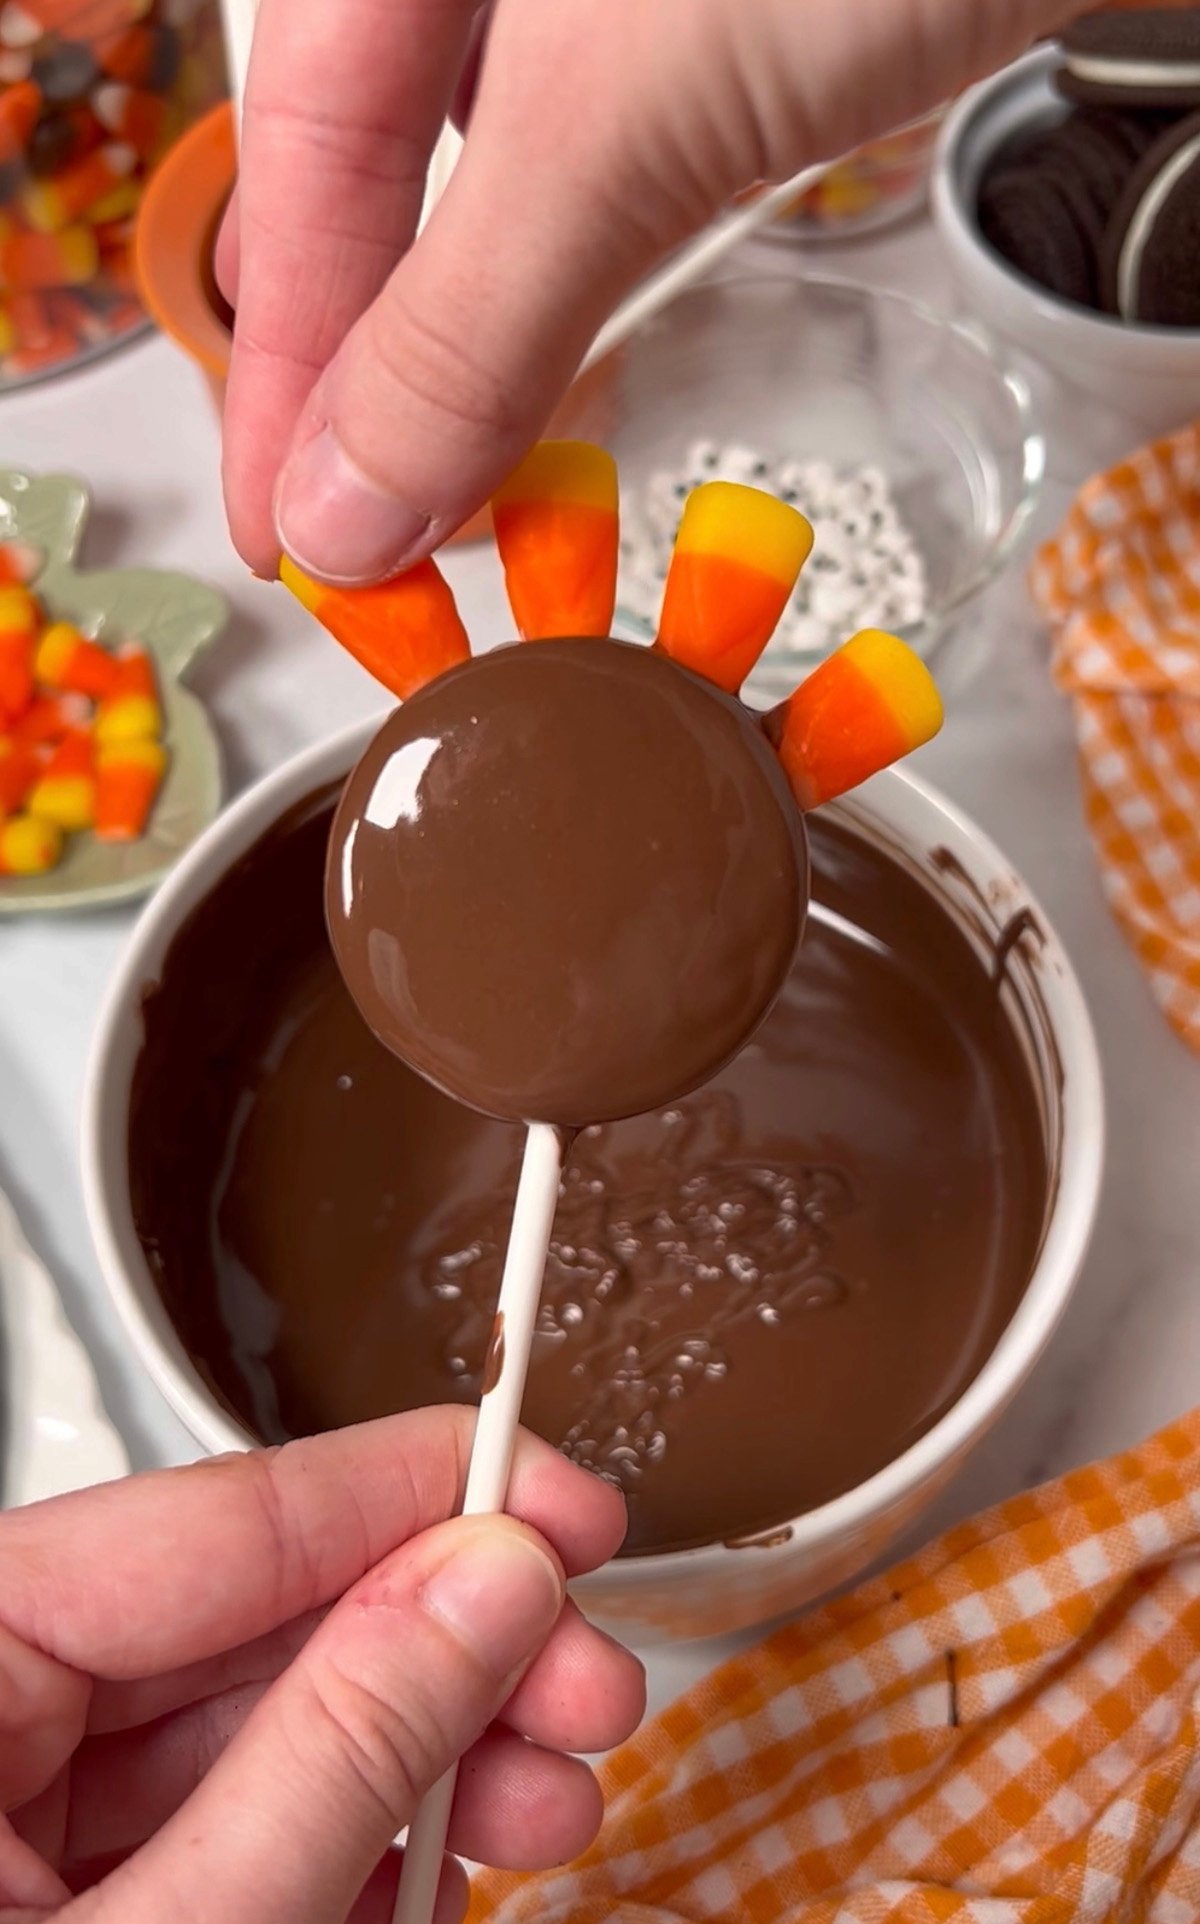 Decorating Oreo Cookies like a Thanksgiving Turkey.